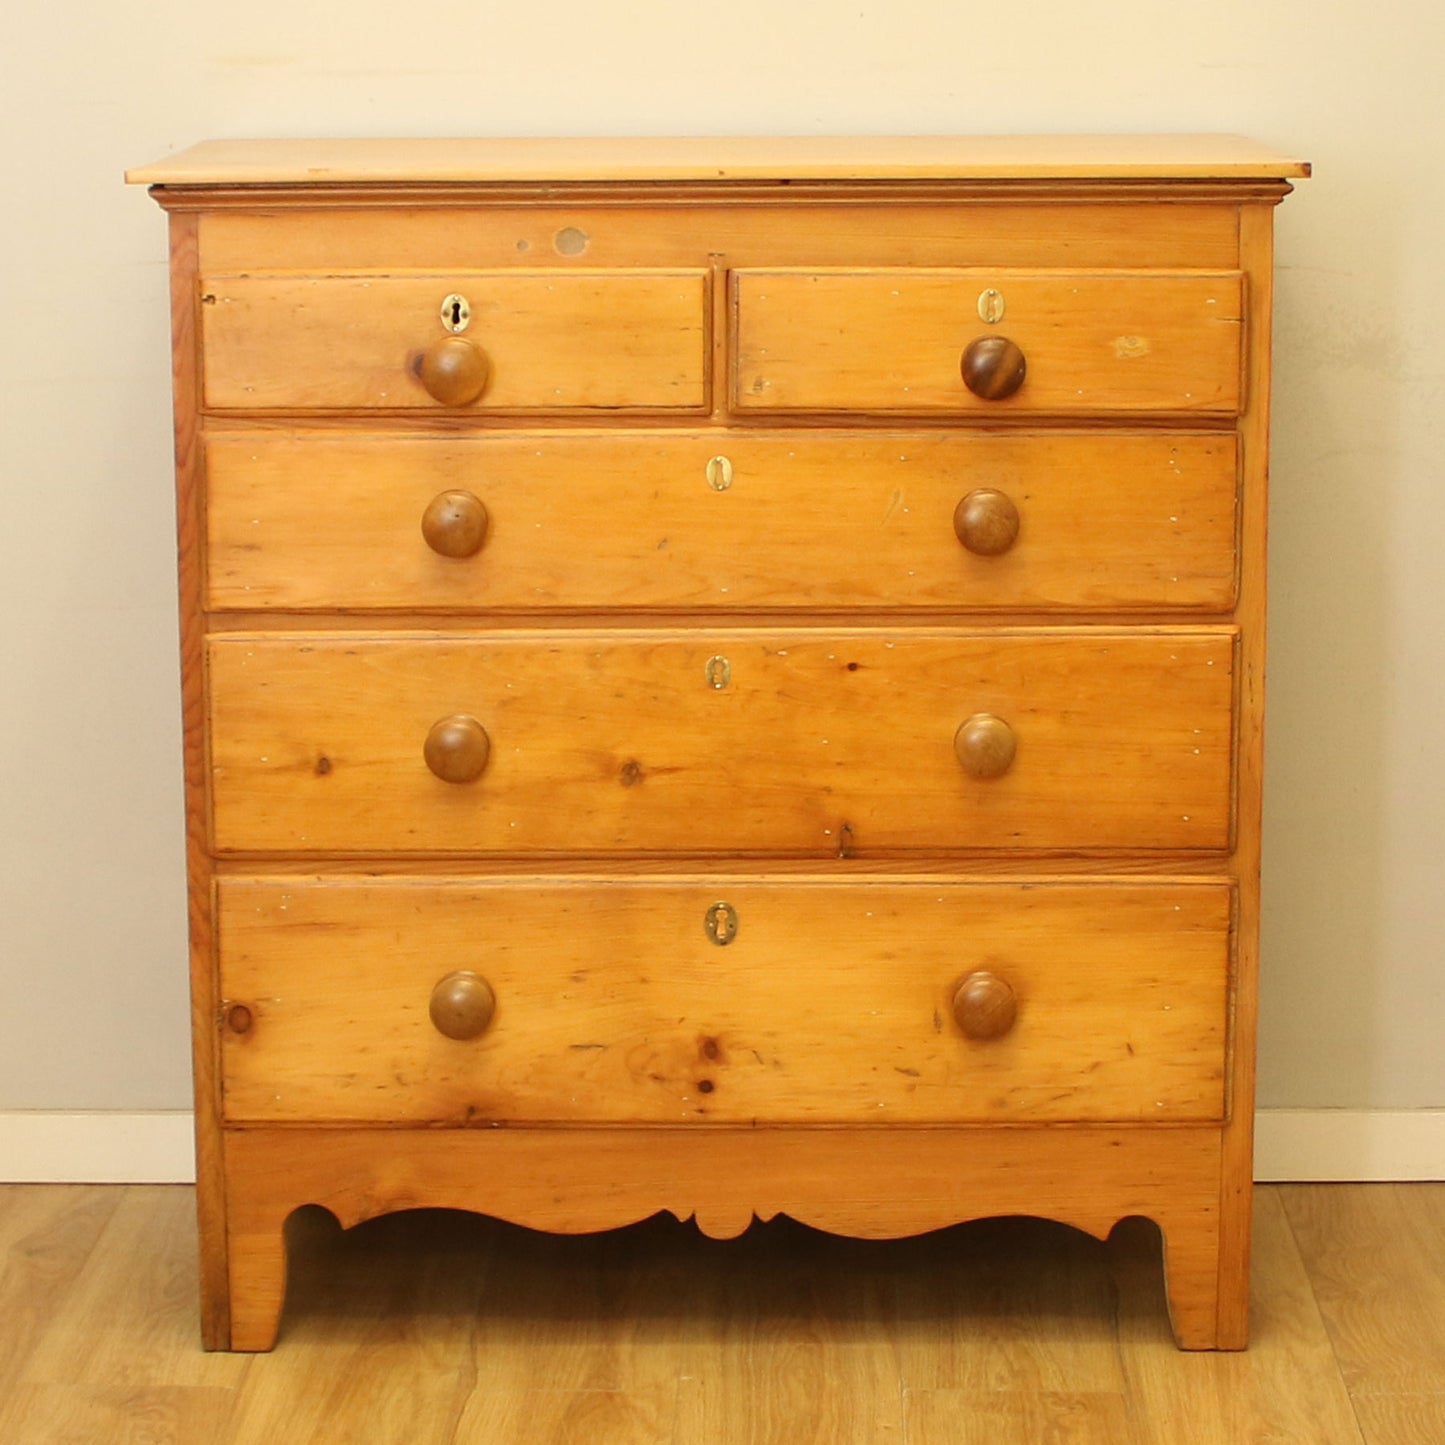 Edwardian Chest of Drawers